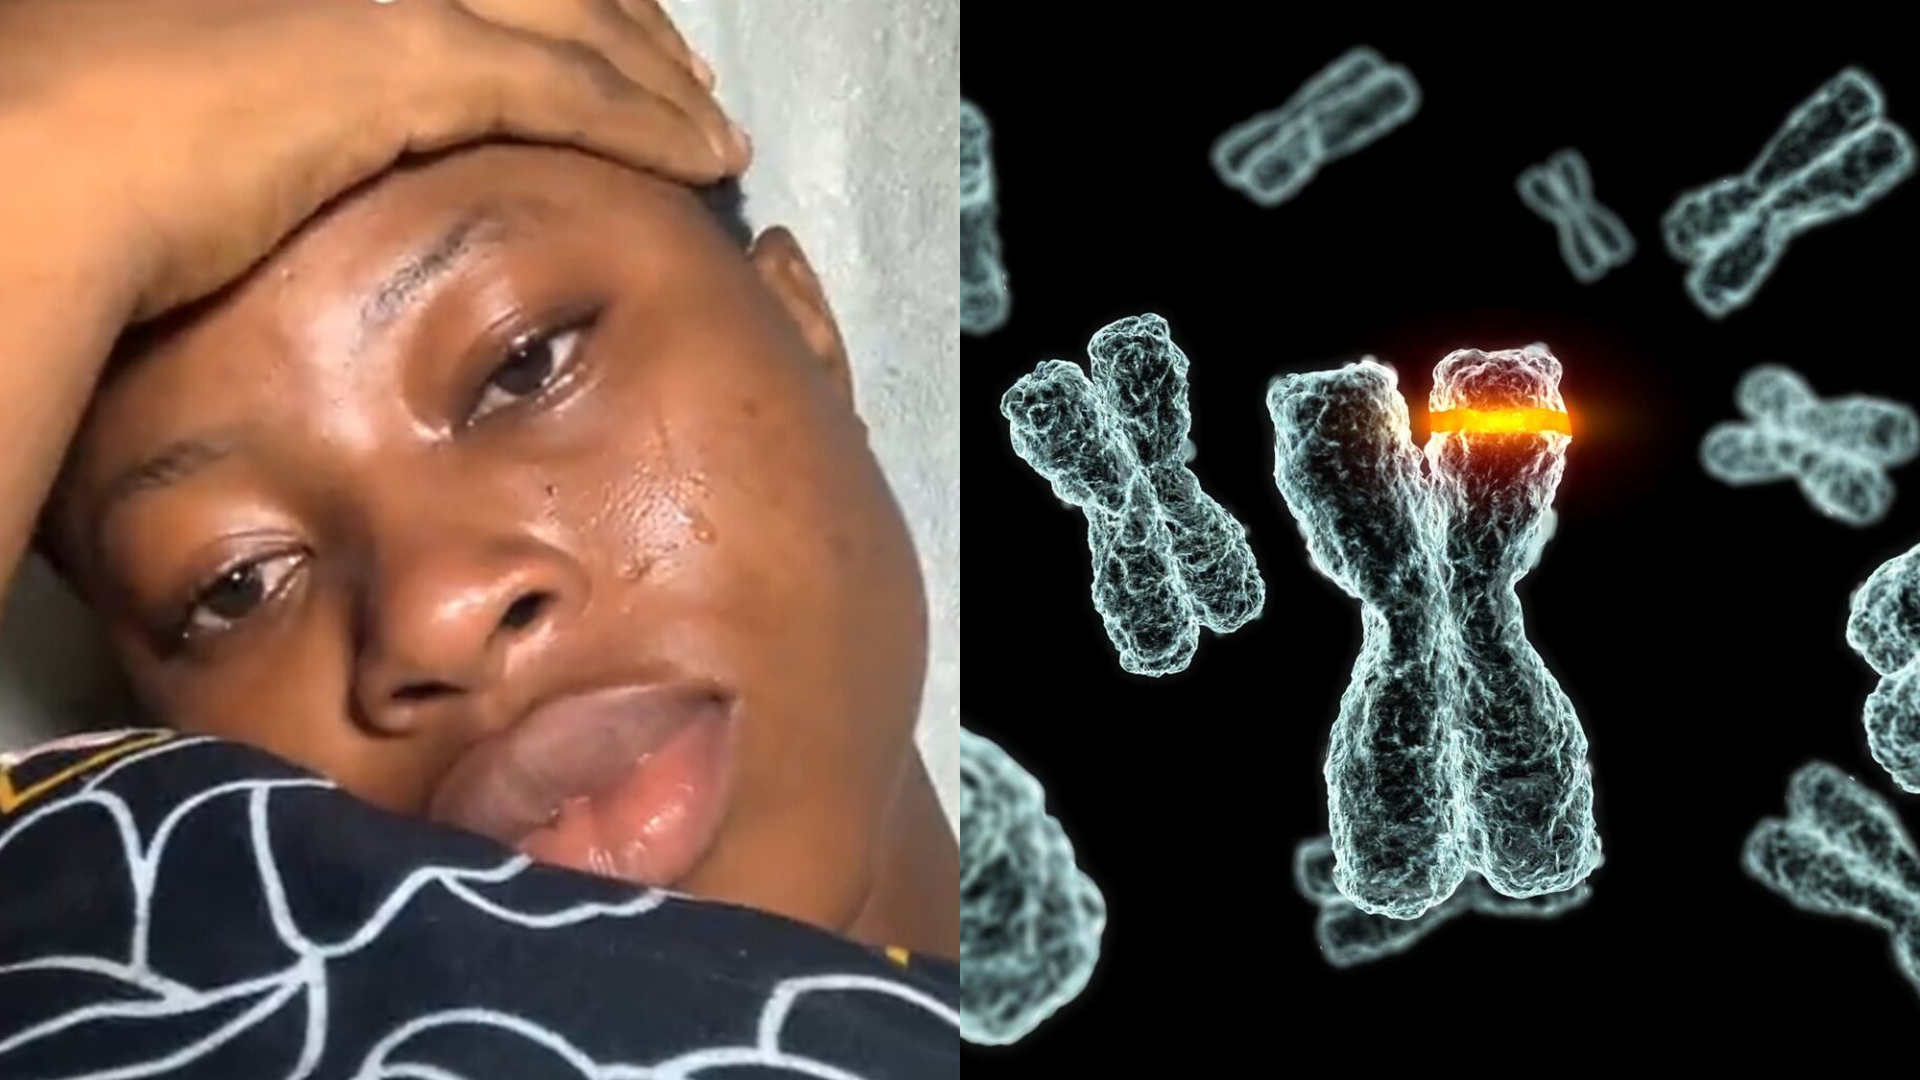 Lady in tears as Genotype result ends her relationship with boyfriend [Video]